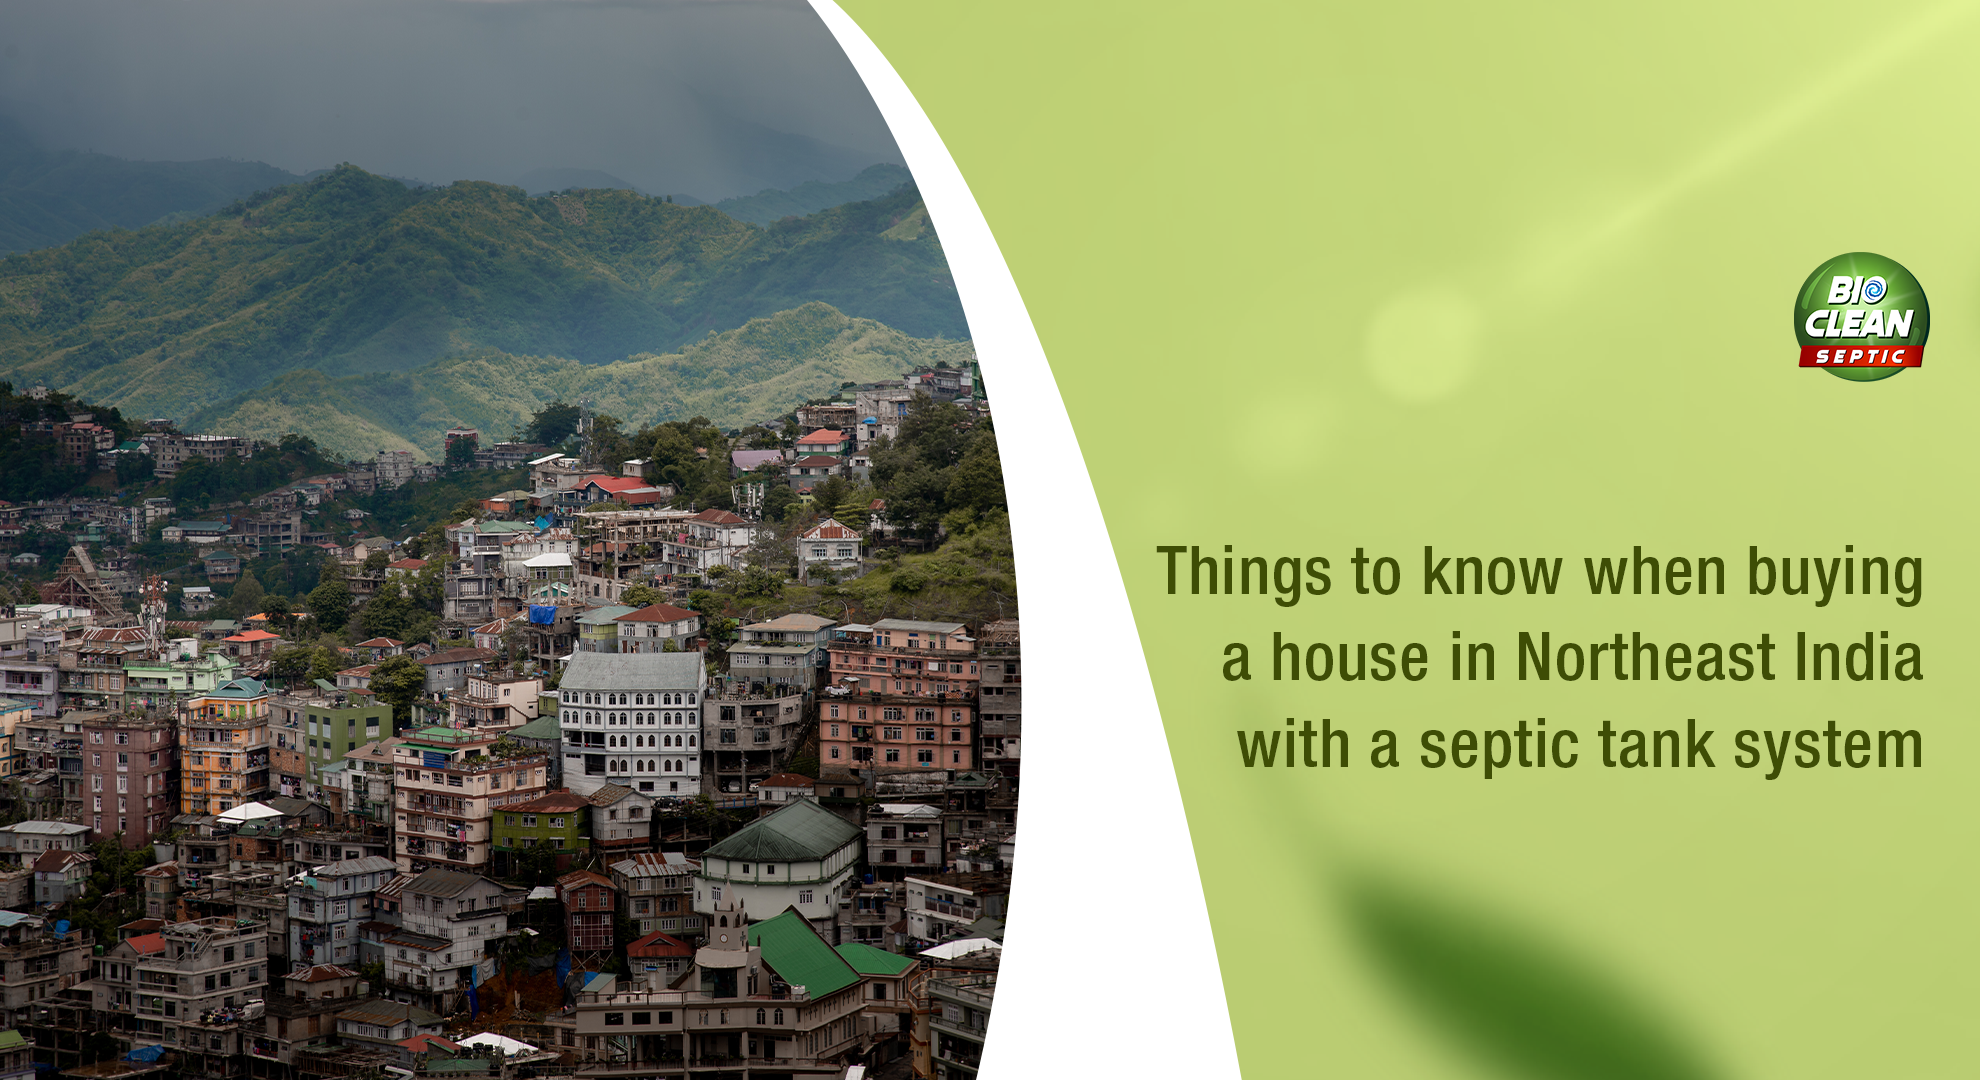 Things to know when buying a house in Northeast India with a Septic Tank System